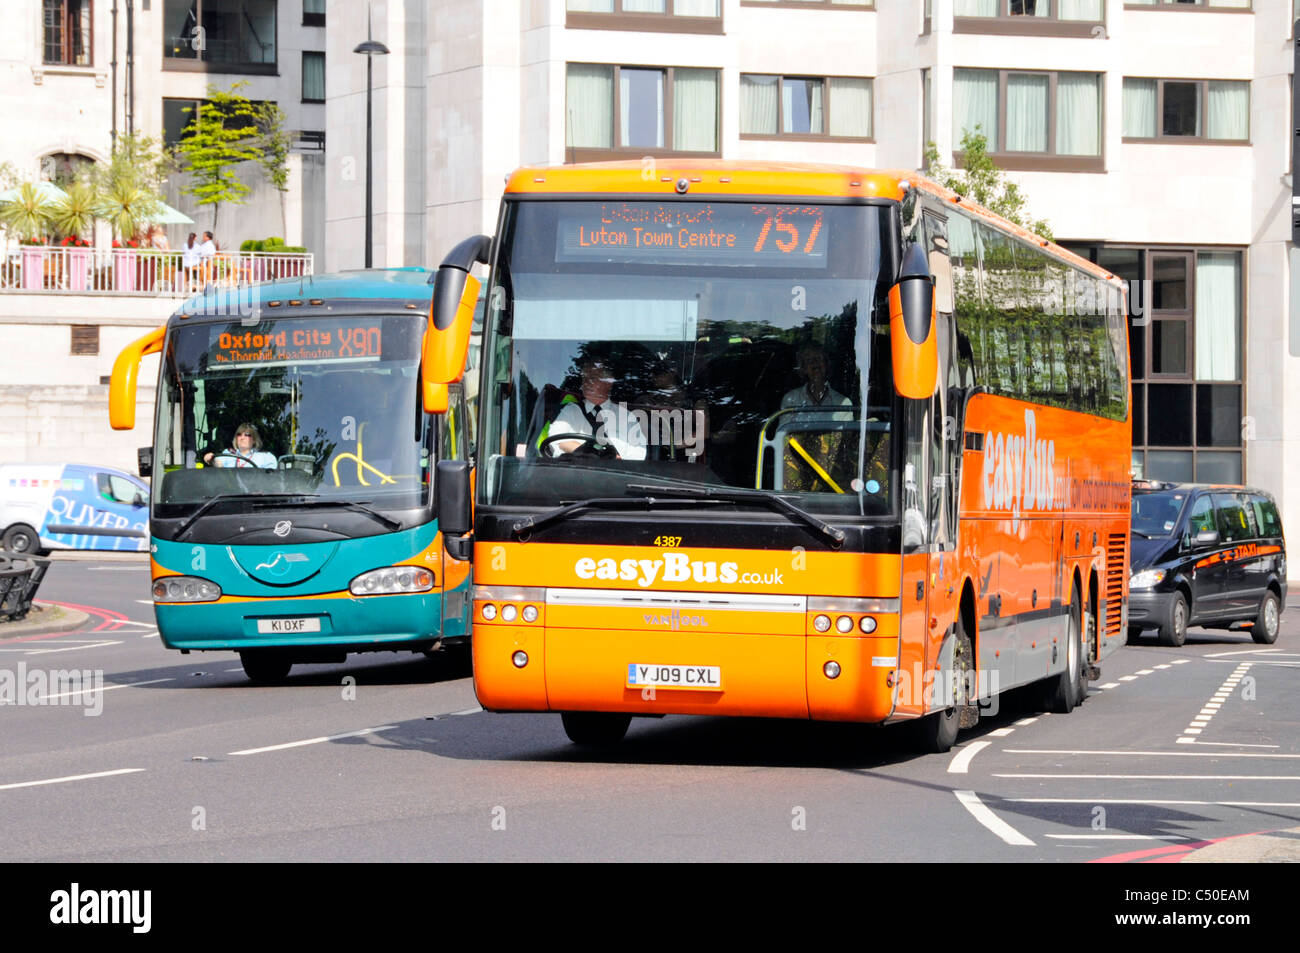 Drivers of two public transport coach bus services enroute to Luton & Oxford with one operated by EasyBus driving along Park Lane London England UK Stock Photo